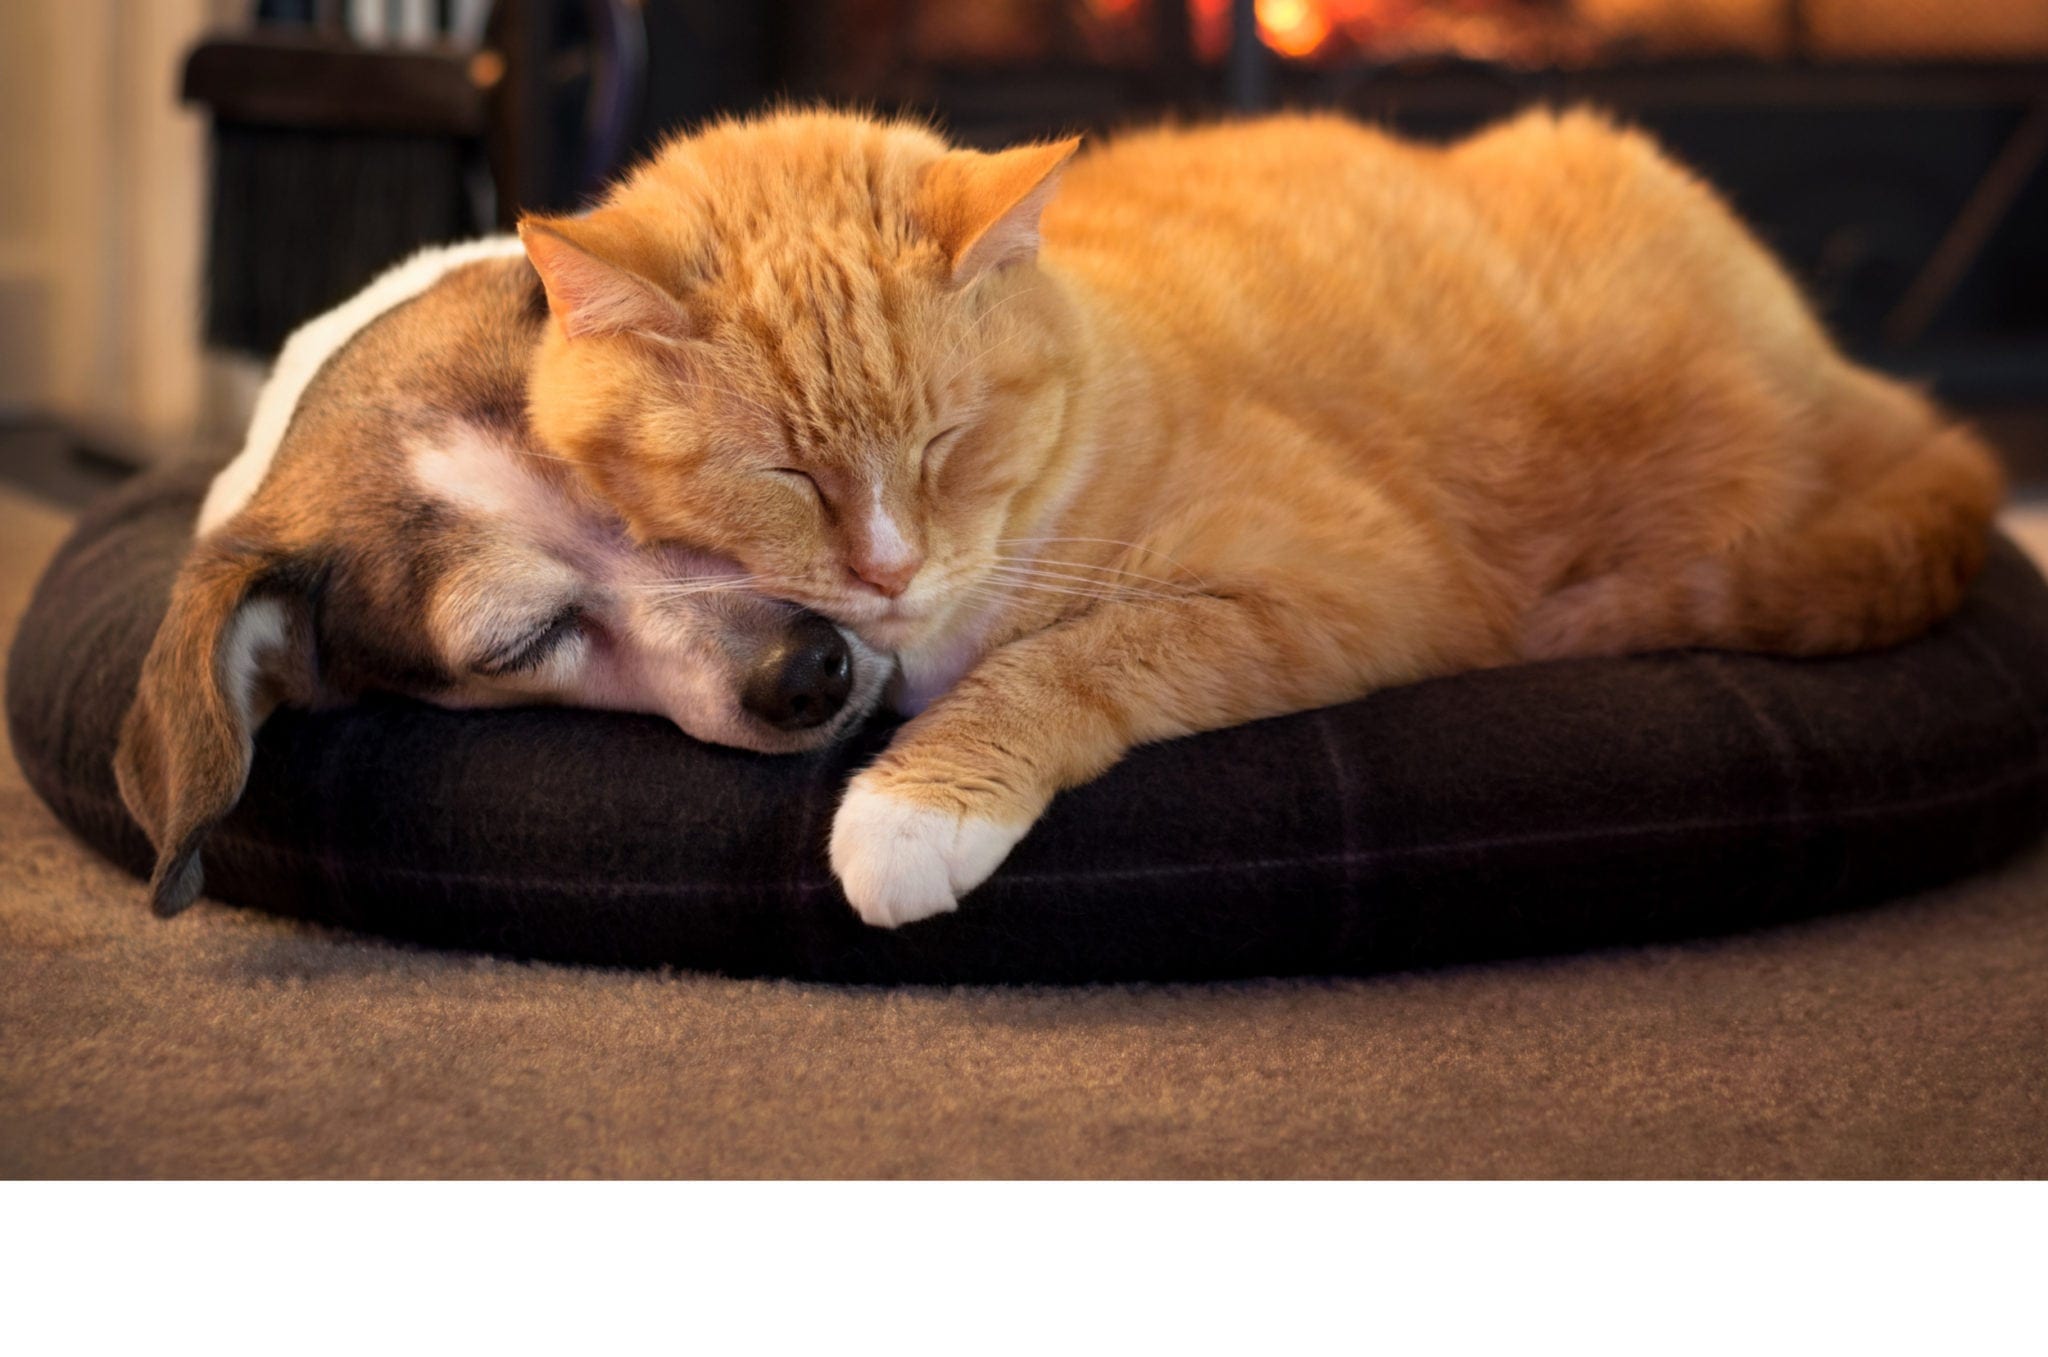 a cat laying on top of a dog while sleeping on a dog bed